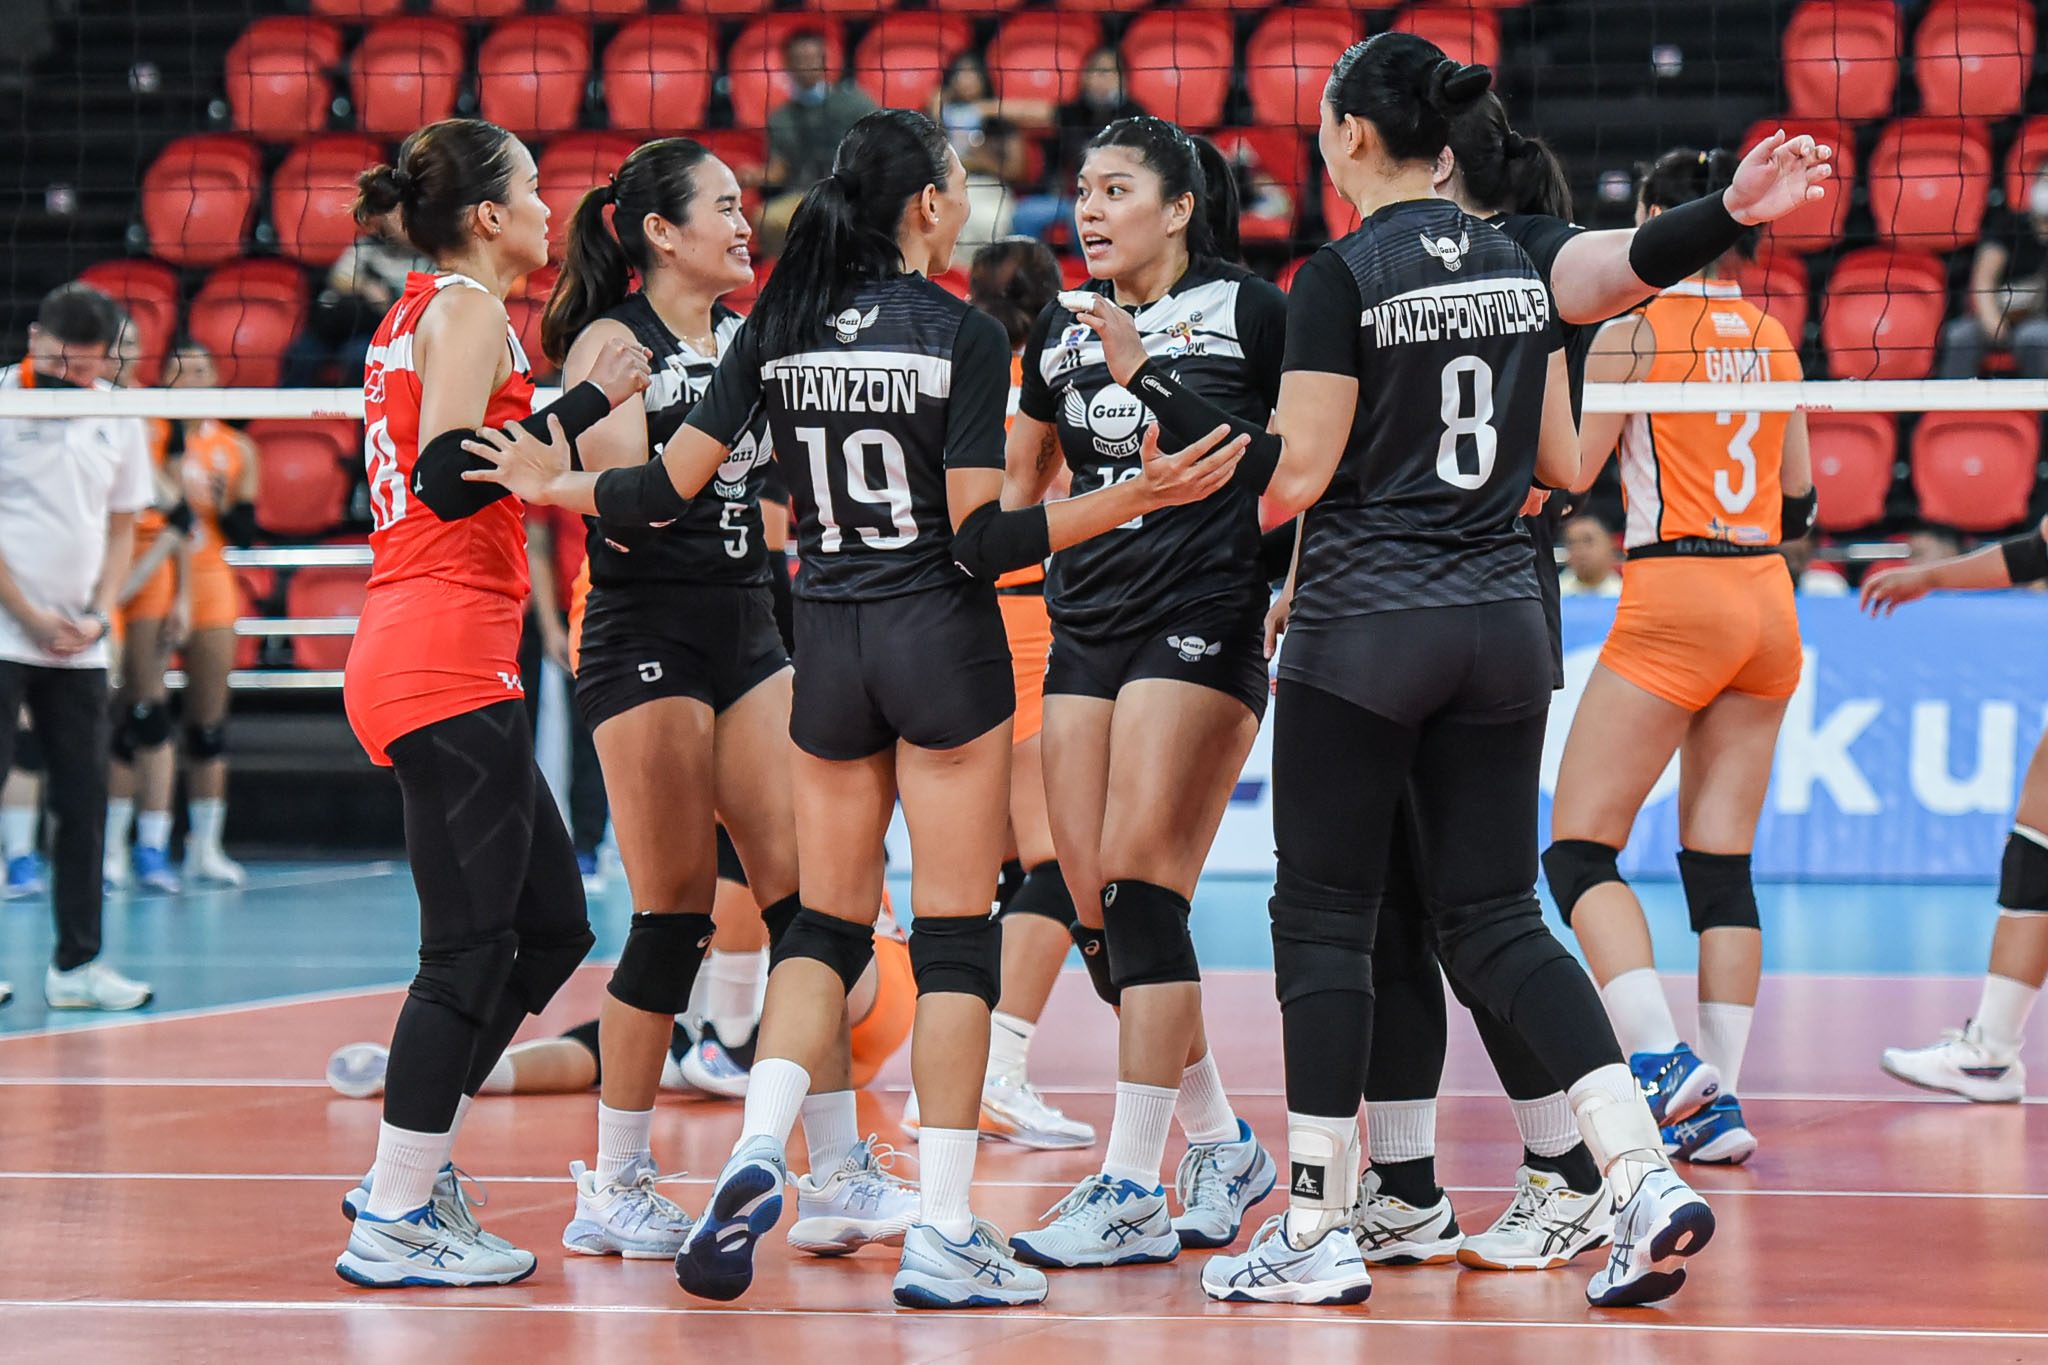 Petro Gazz, Cignal roll to sweeps as PVL resumes with quadruple-headers